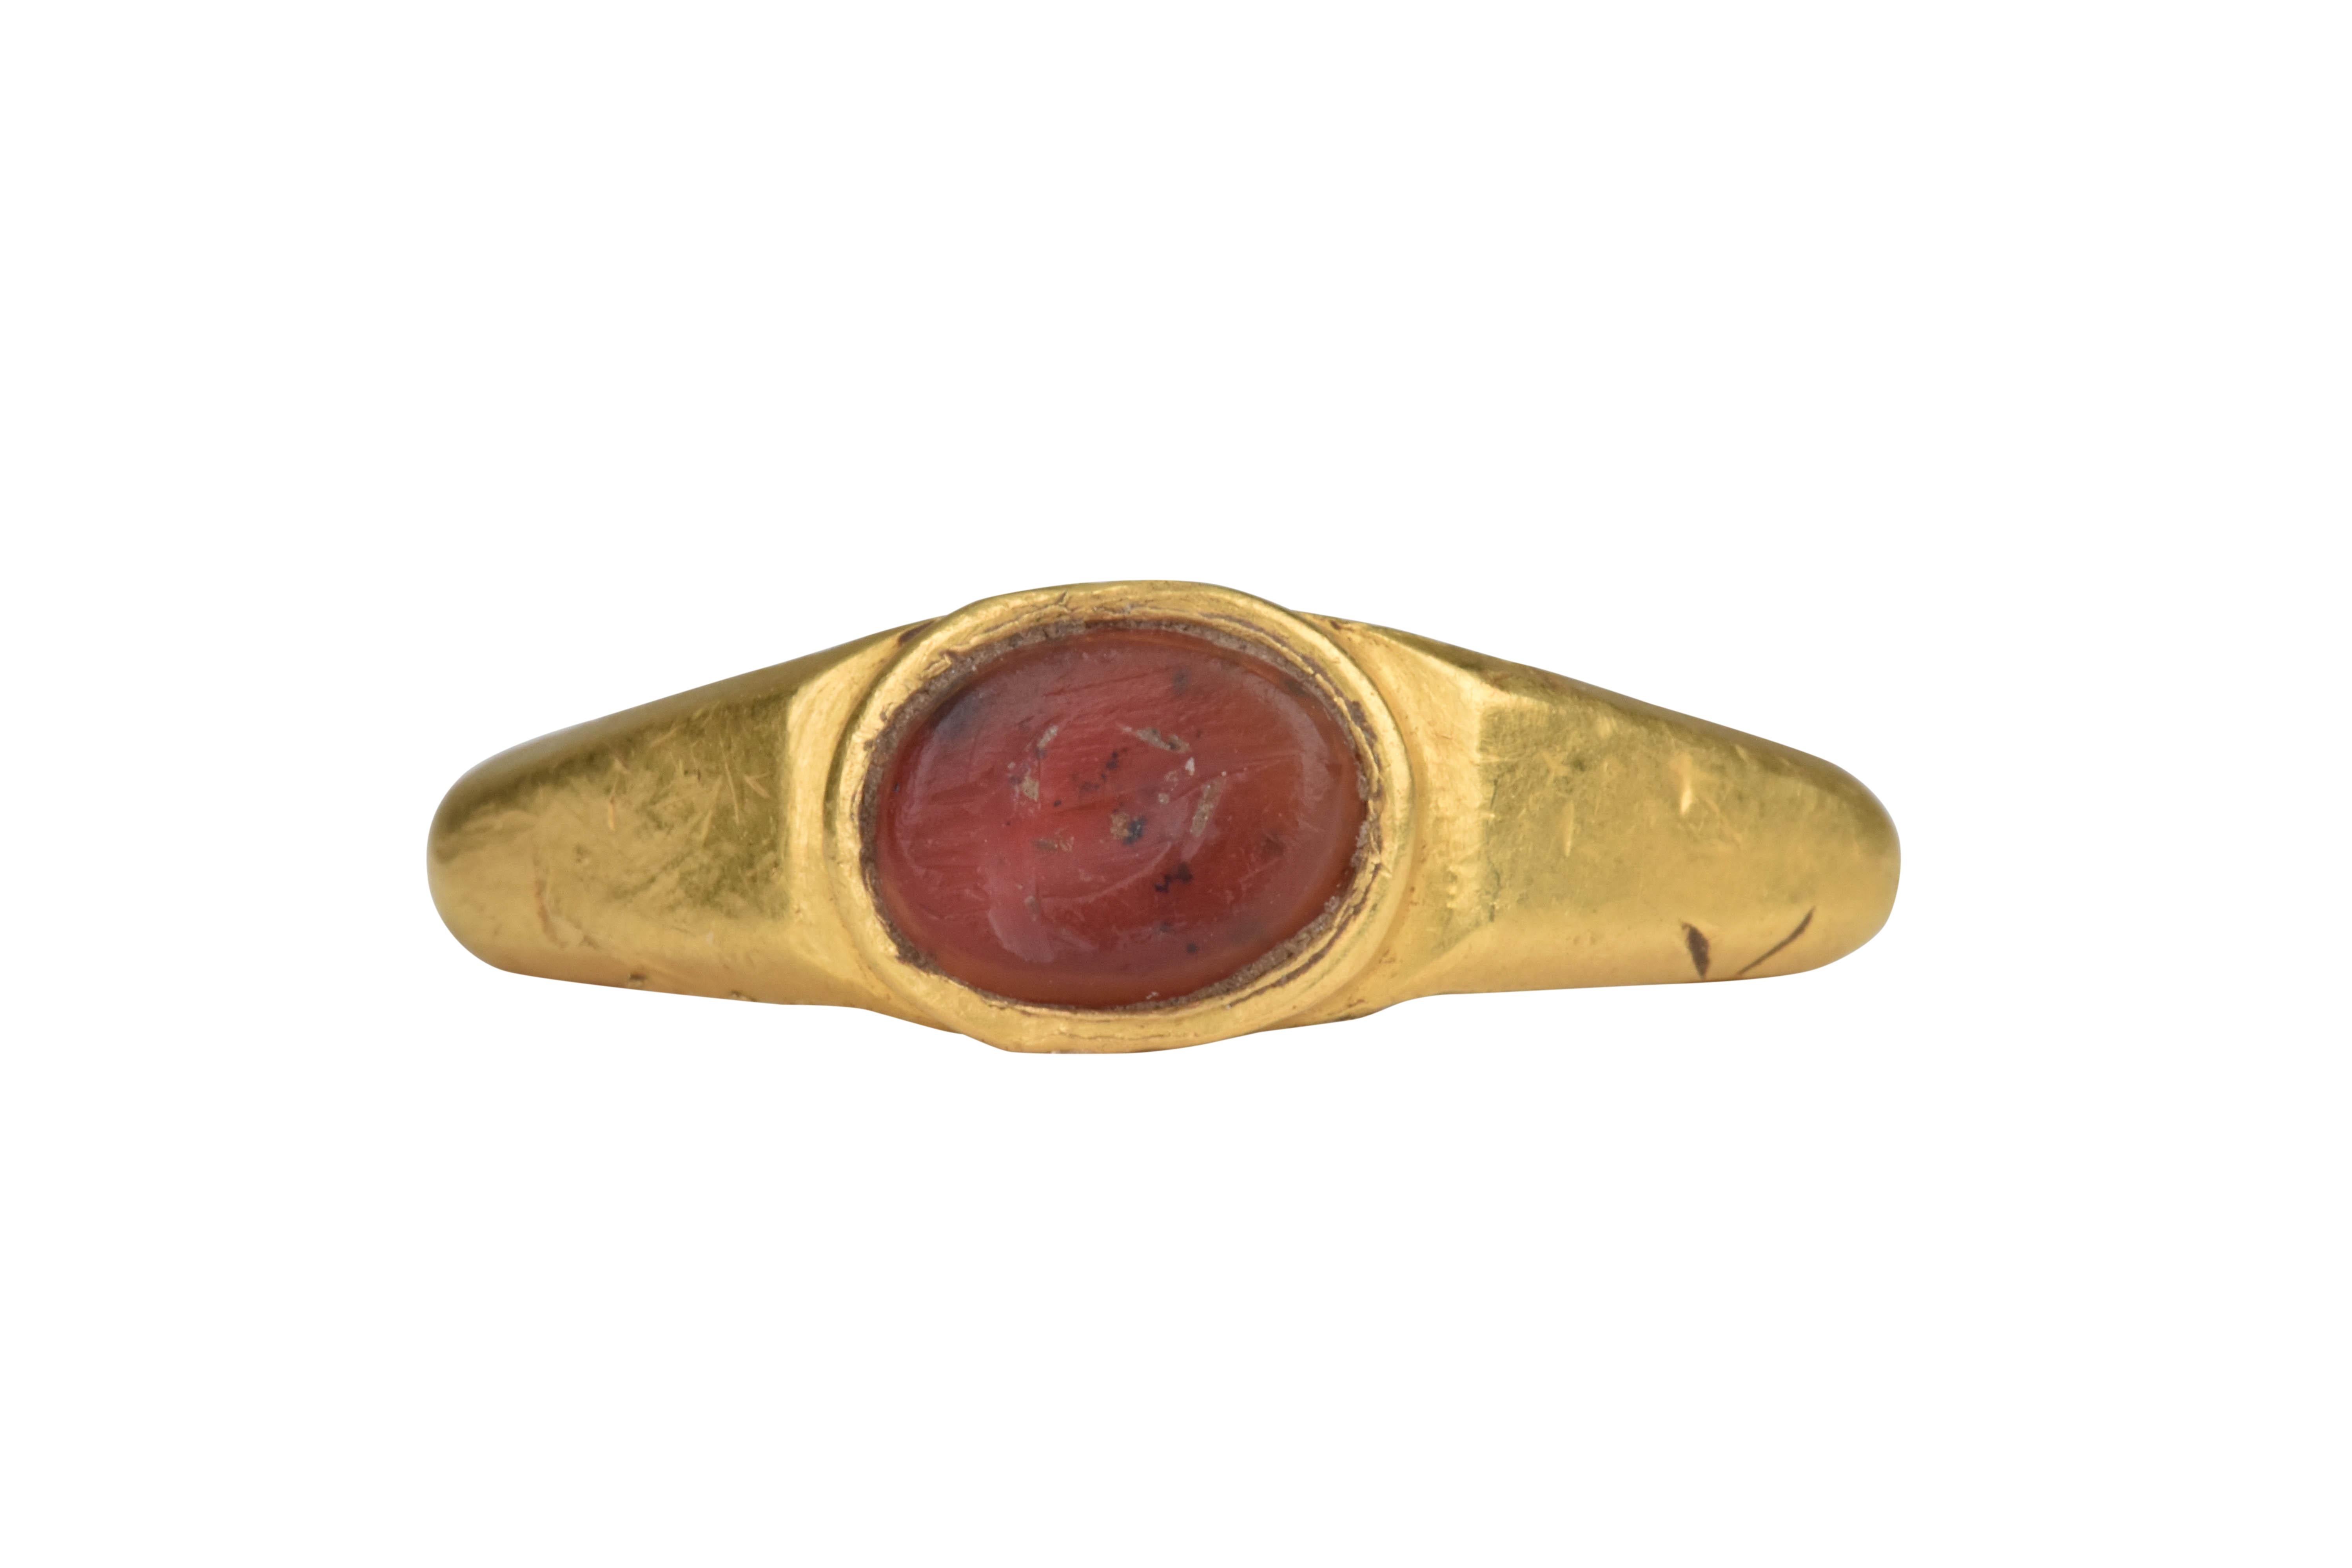 Ancient Roman Gold Intaglio Signet Ring with Cornucopia- Horn of Plenty

Ca. 100-300 AD, An Ancient Roman gold finger ring with expanding hoop, angled and facetted shoulders. Bezel set with an oval carnelian intaglio engraved with a Cornucopia - the